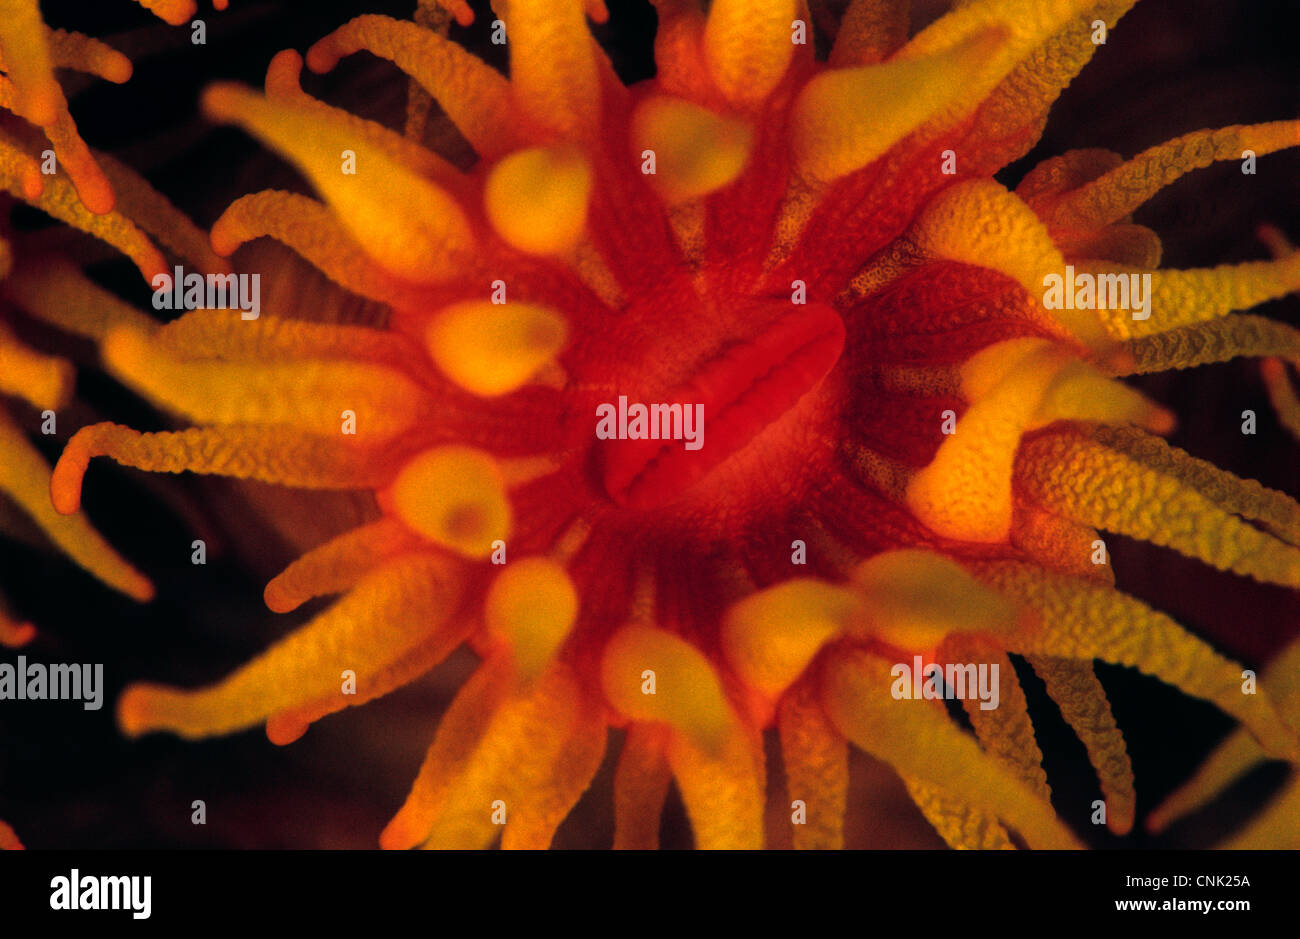 Mouthopening of Balanophyllia sp., Orange cup coral. Close up taken in the Indian Ocean. The mouth opening is closed. Stock Photo